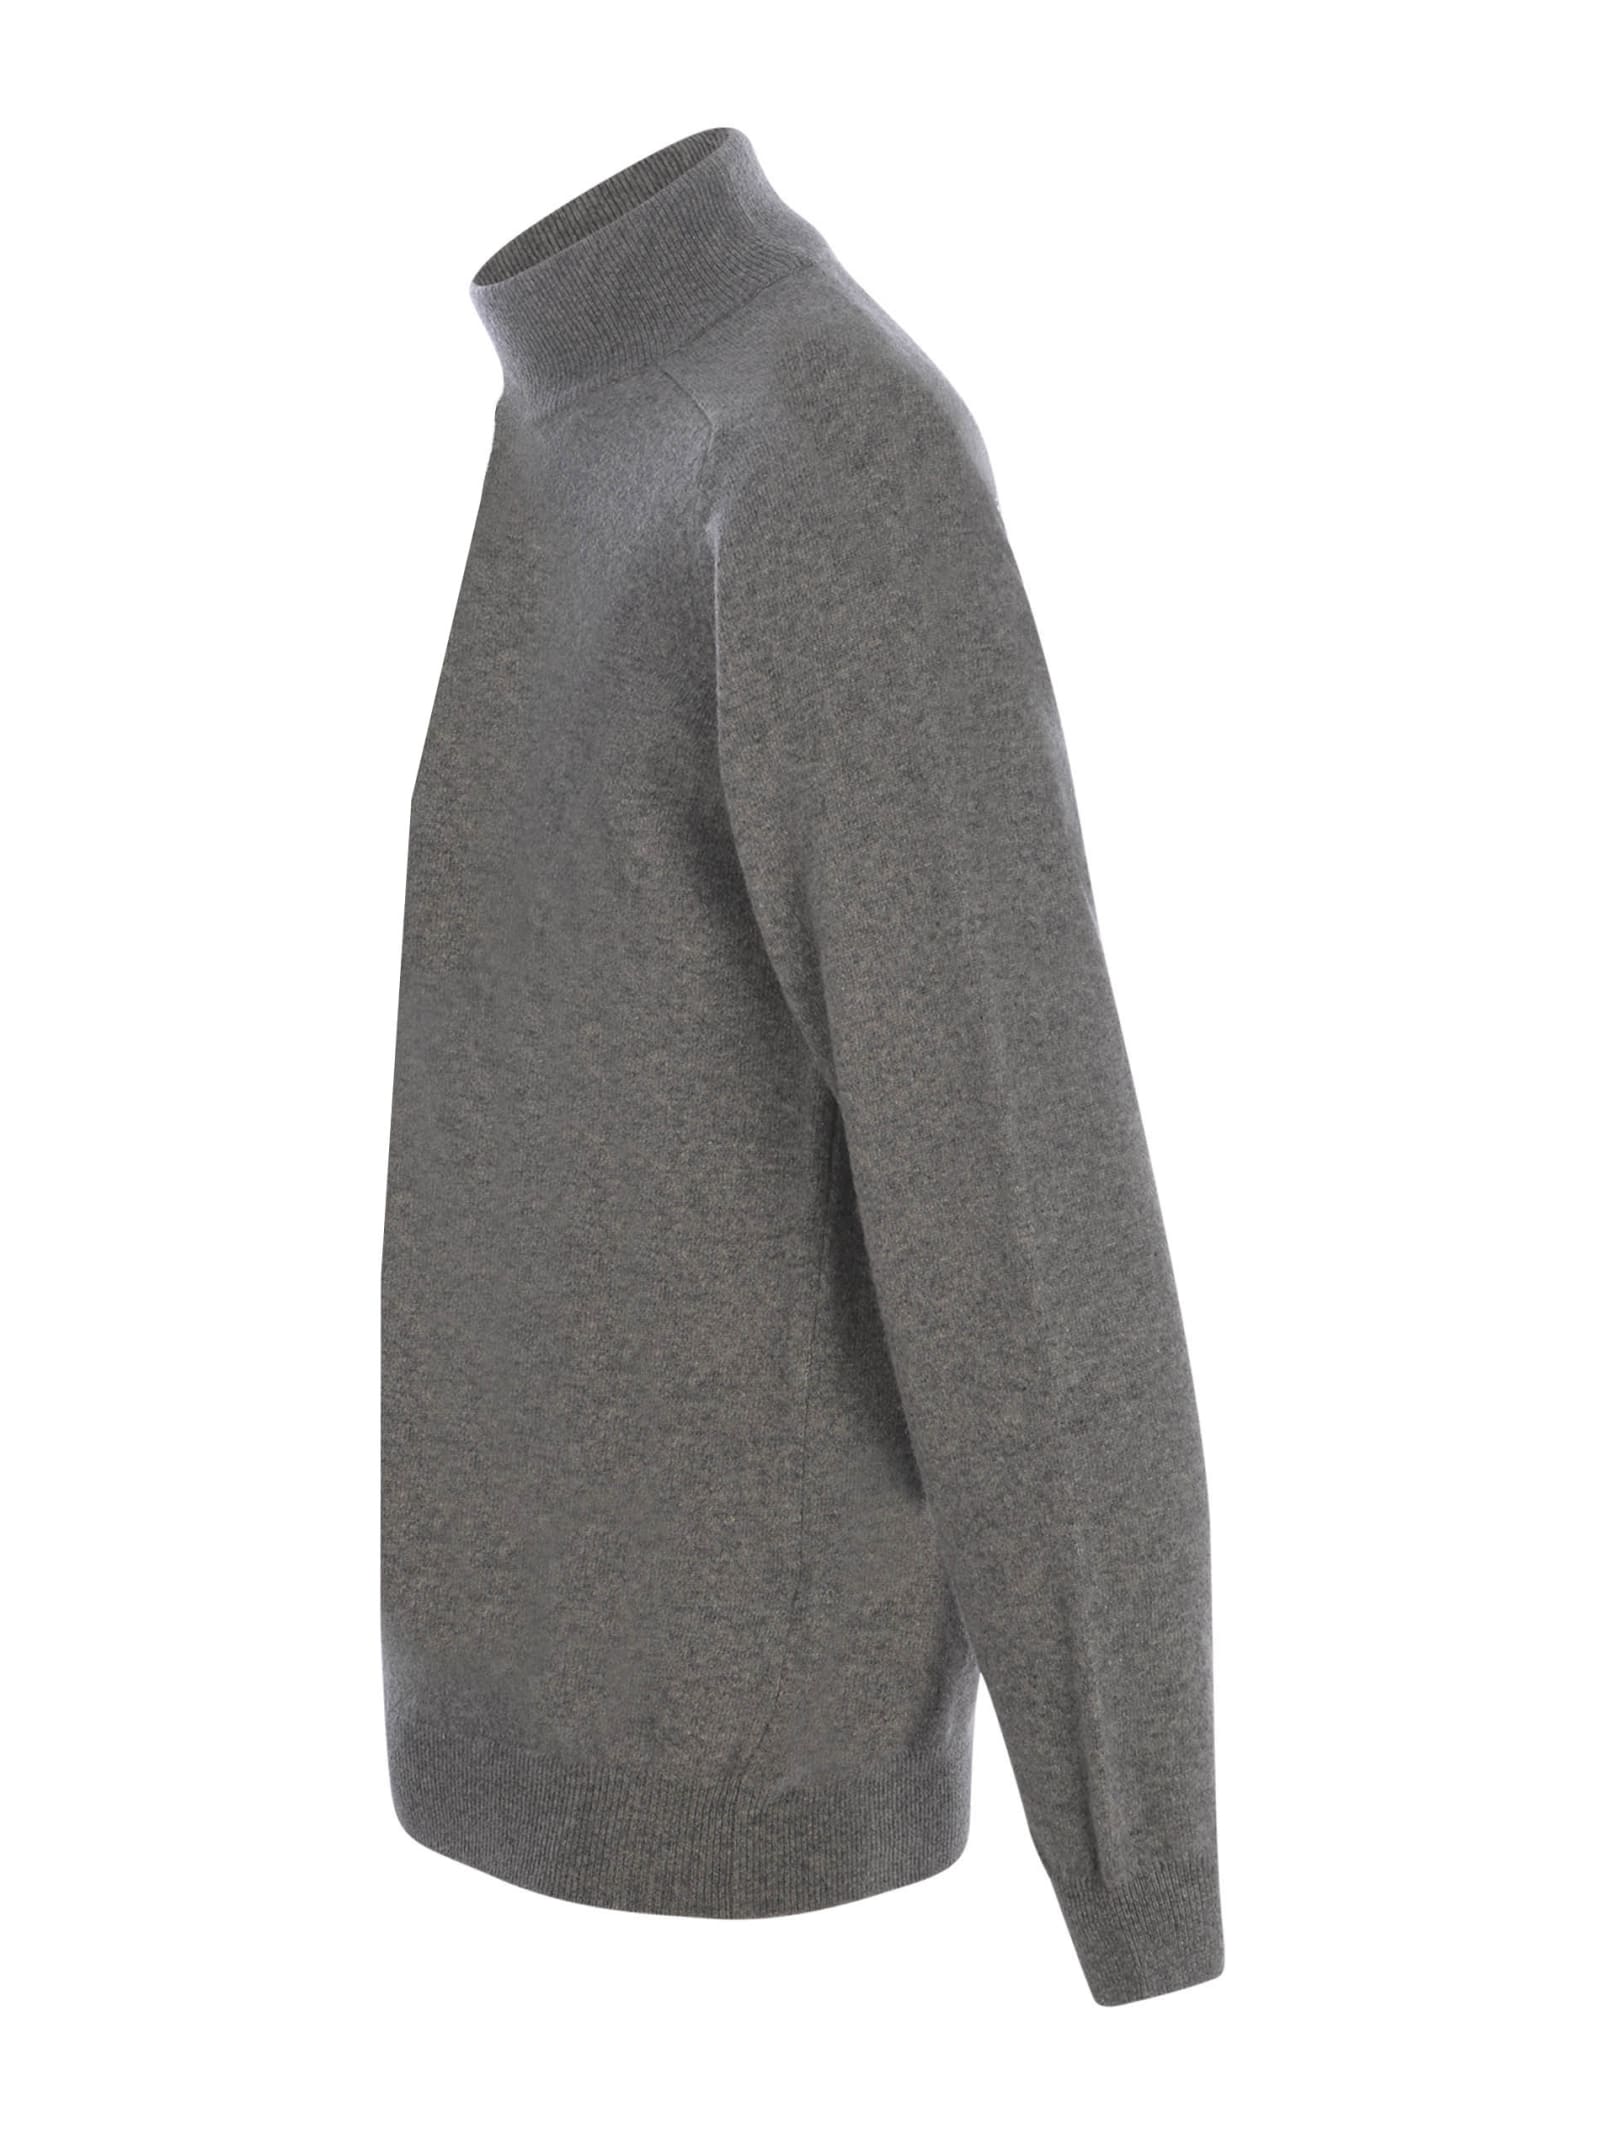 Shop Jeordie's Sweater Jeodies Made Of Extra Fine Wool In Grey